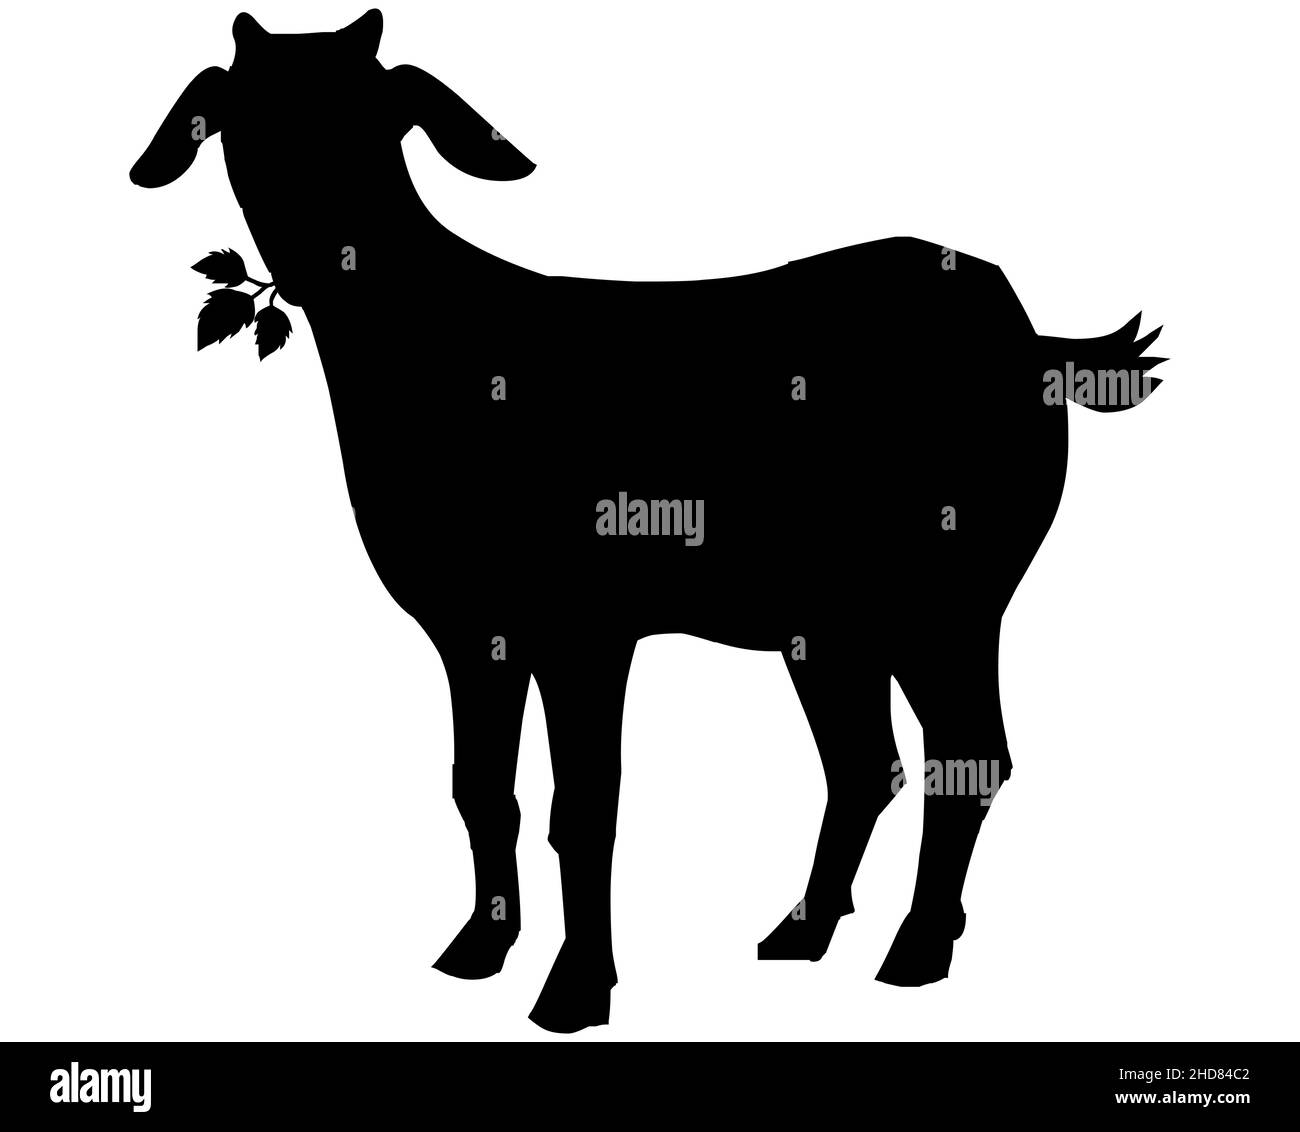 Black silhouette of a goat eating grass or leaves from the ground, logo or label of a goat Stock Vector